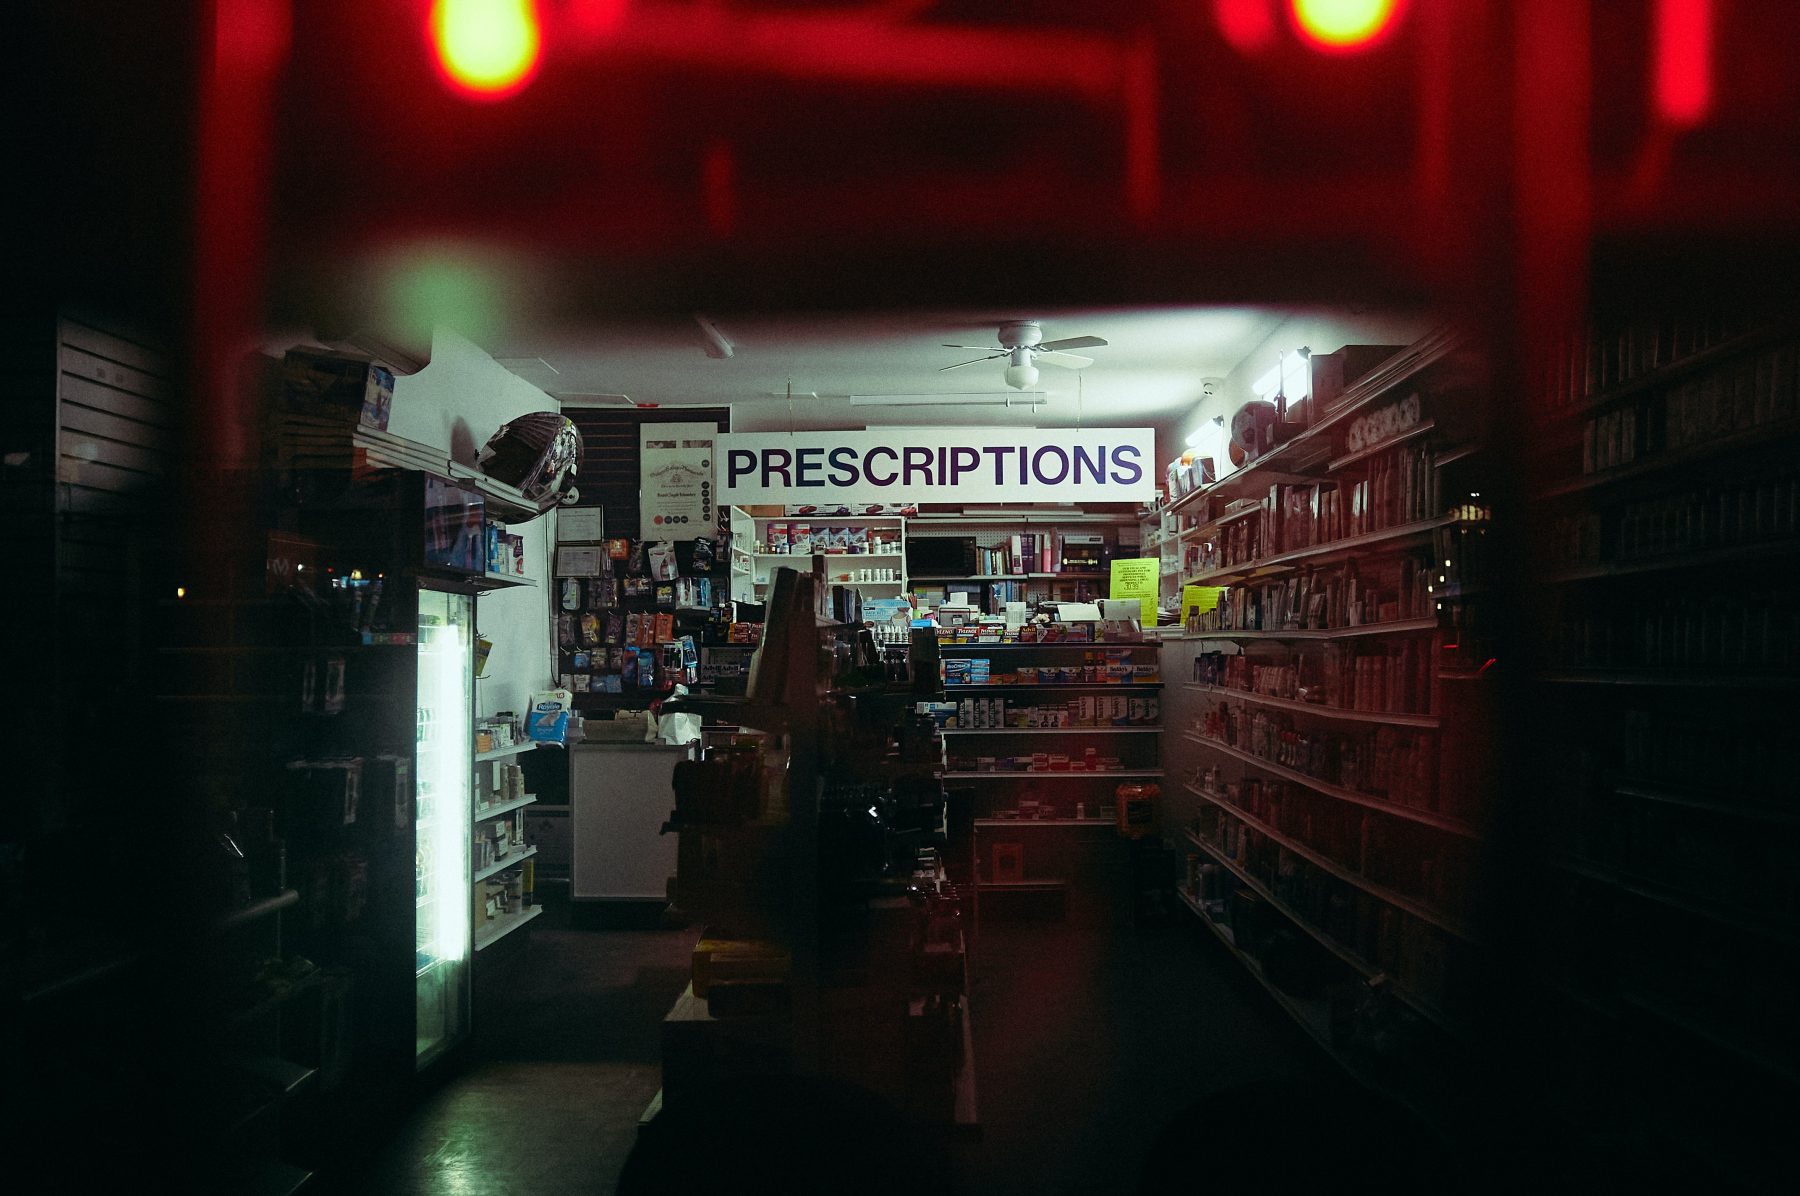 Dark picture of a small shop with various items on the shelves and a sign that spells prescriptions in the middle.